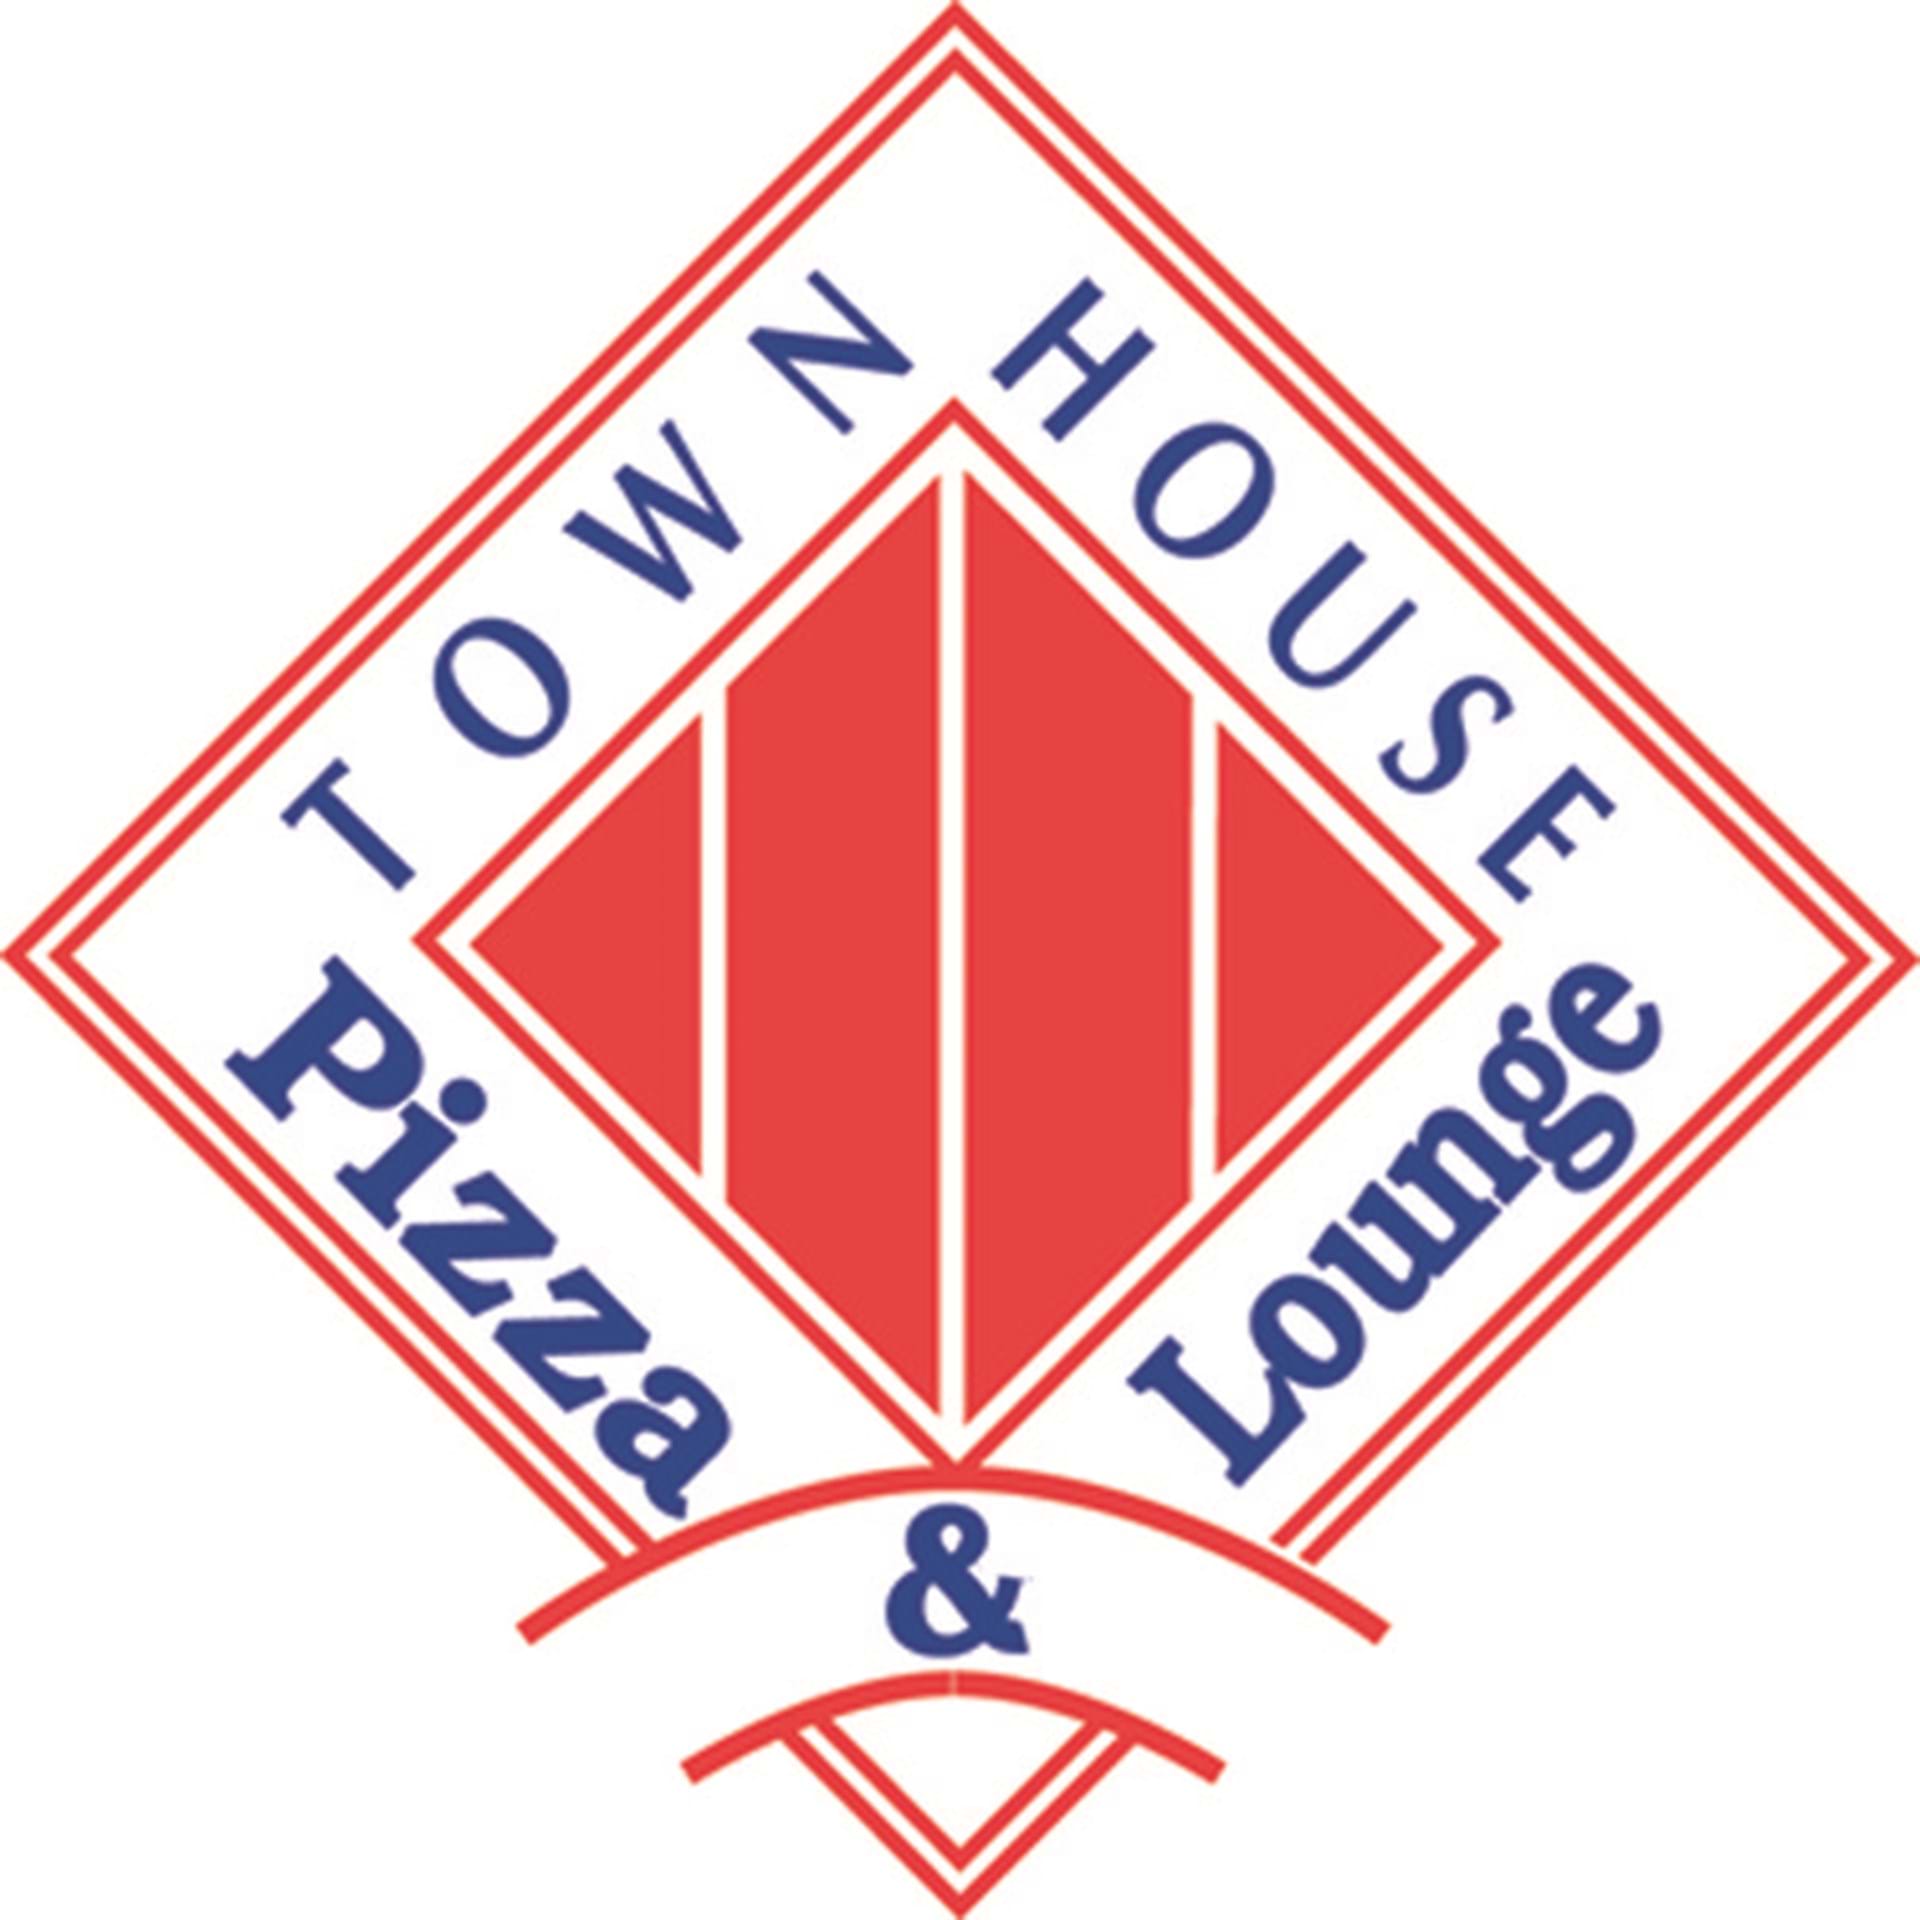 Townhouse Pizza & Lounge